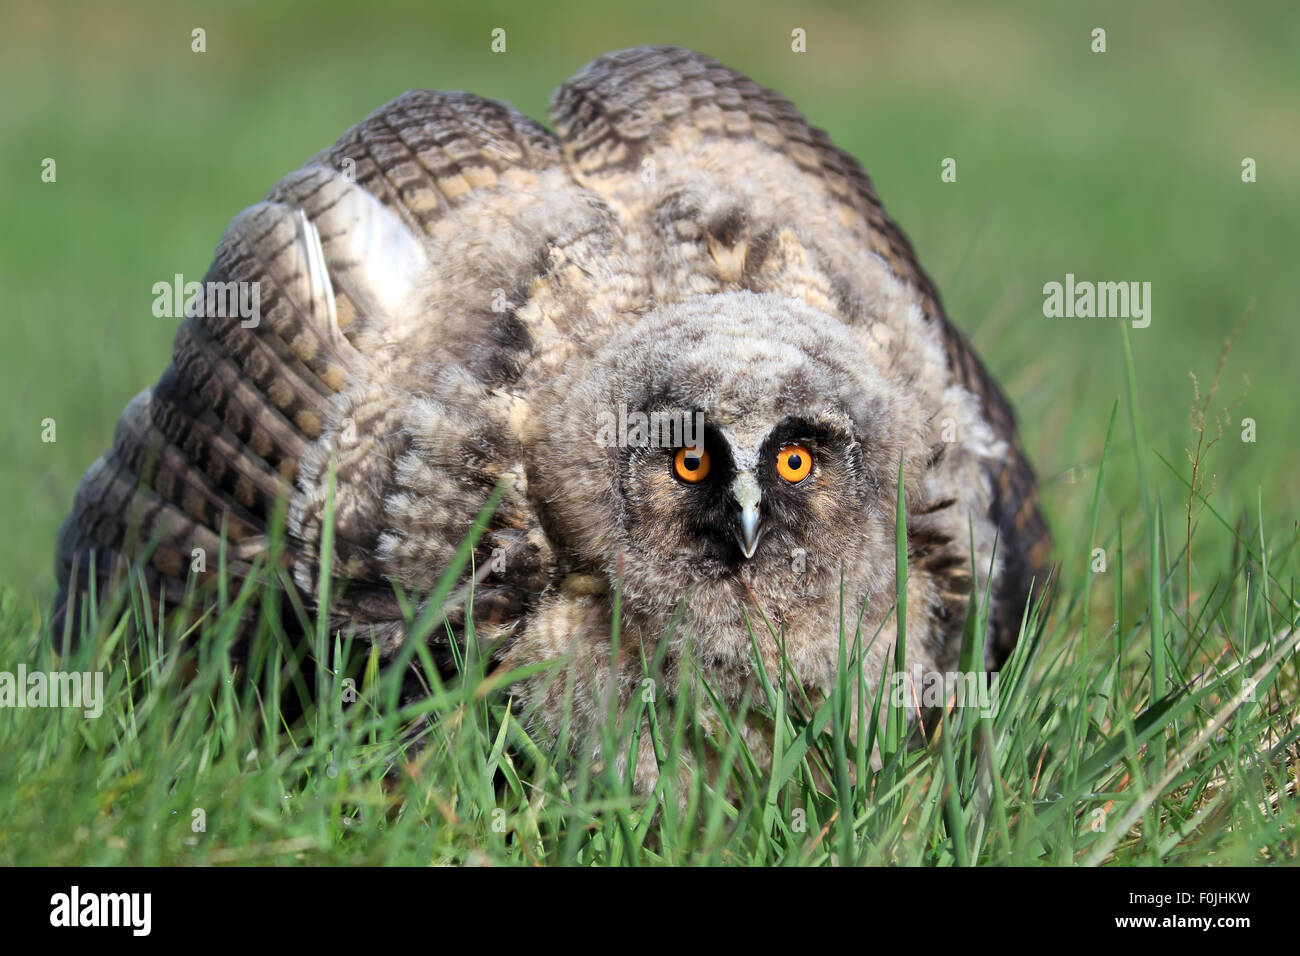 A Natural, Wild Long-eared Owlet (Asio otus) portrait. Showing display posture. Taken in the Angus Glens, Scotland, UK. Stock Photo